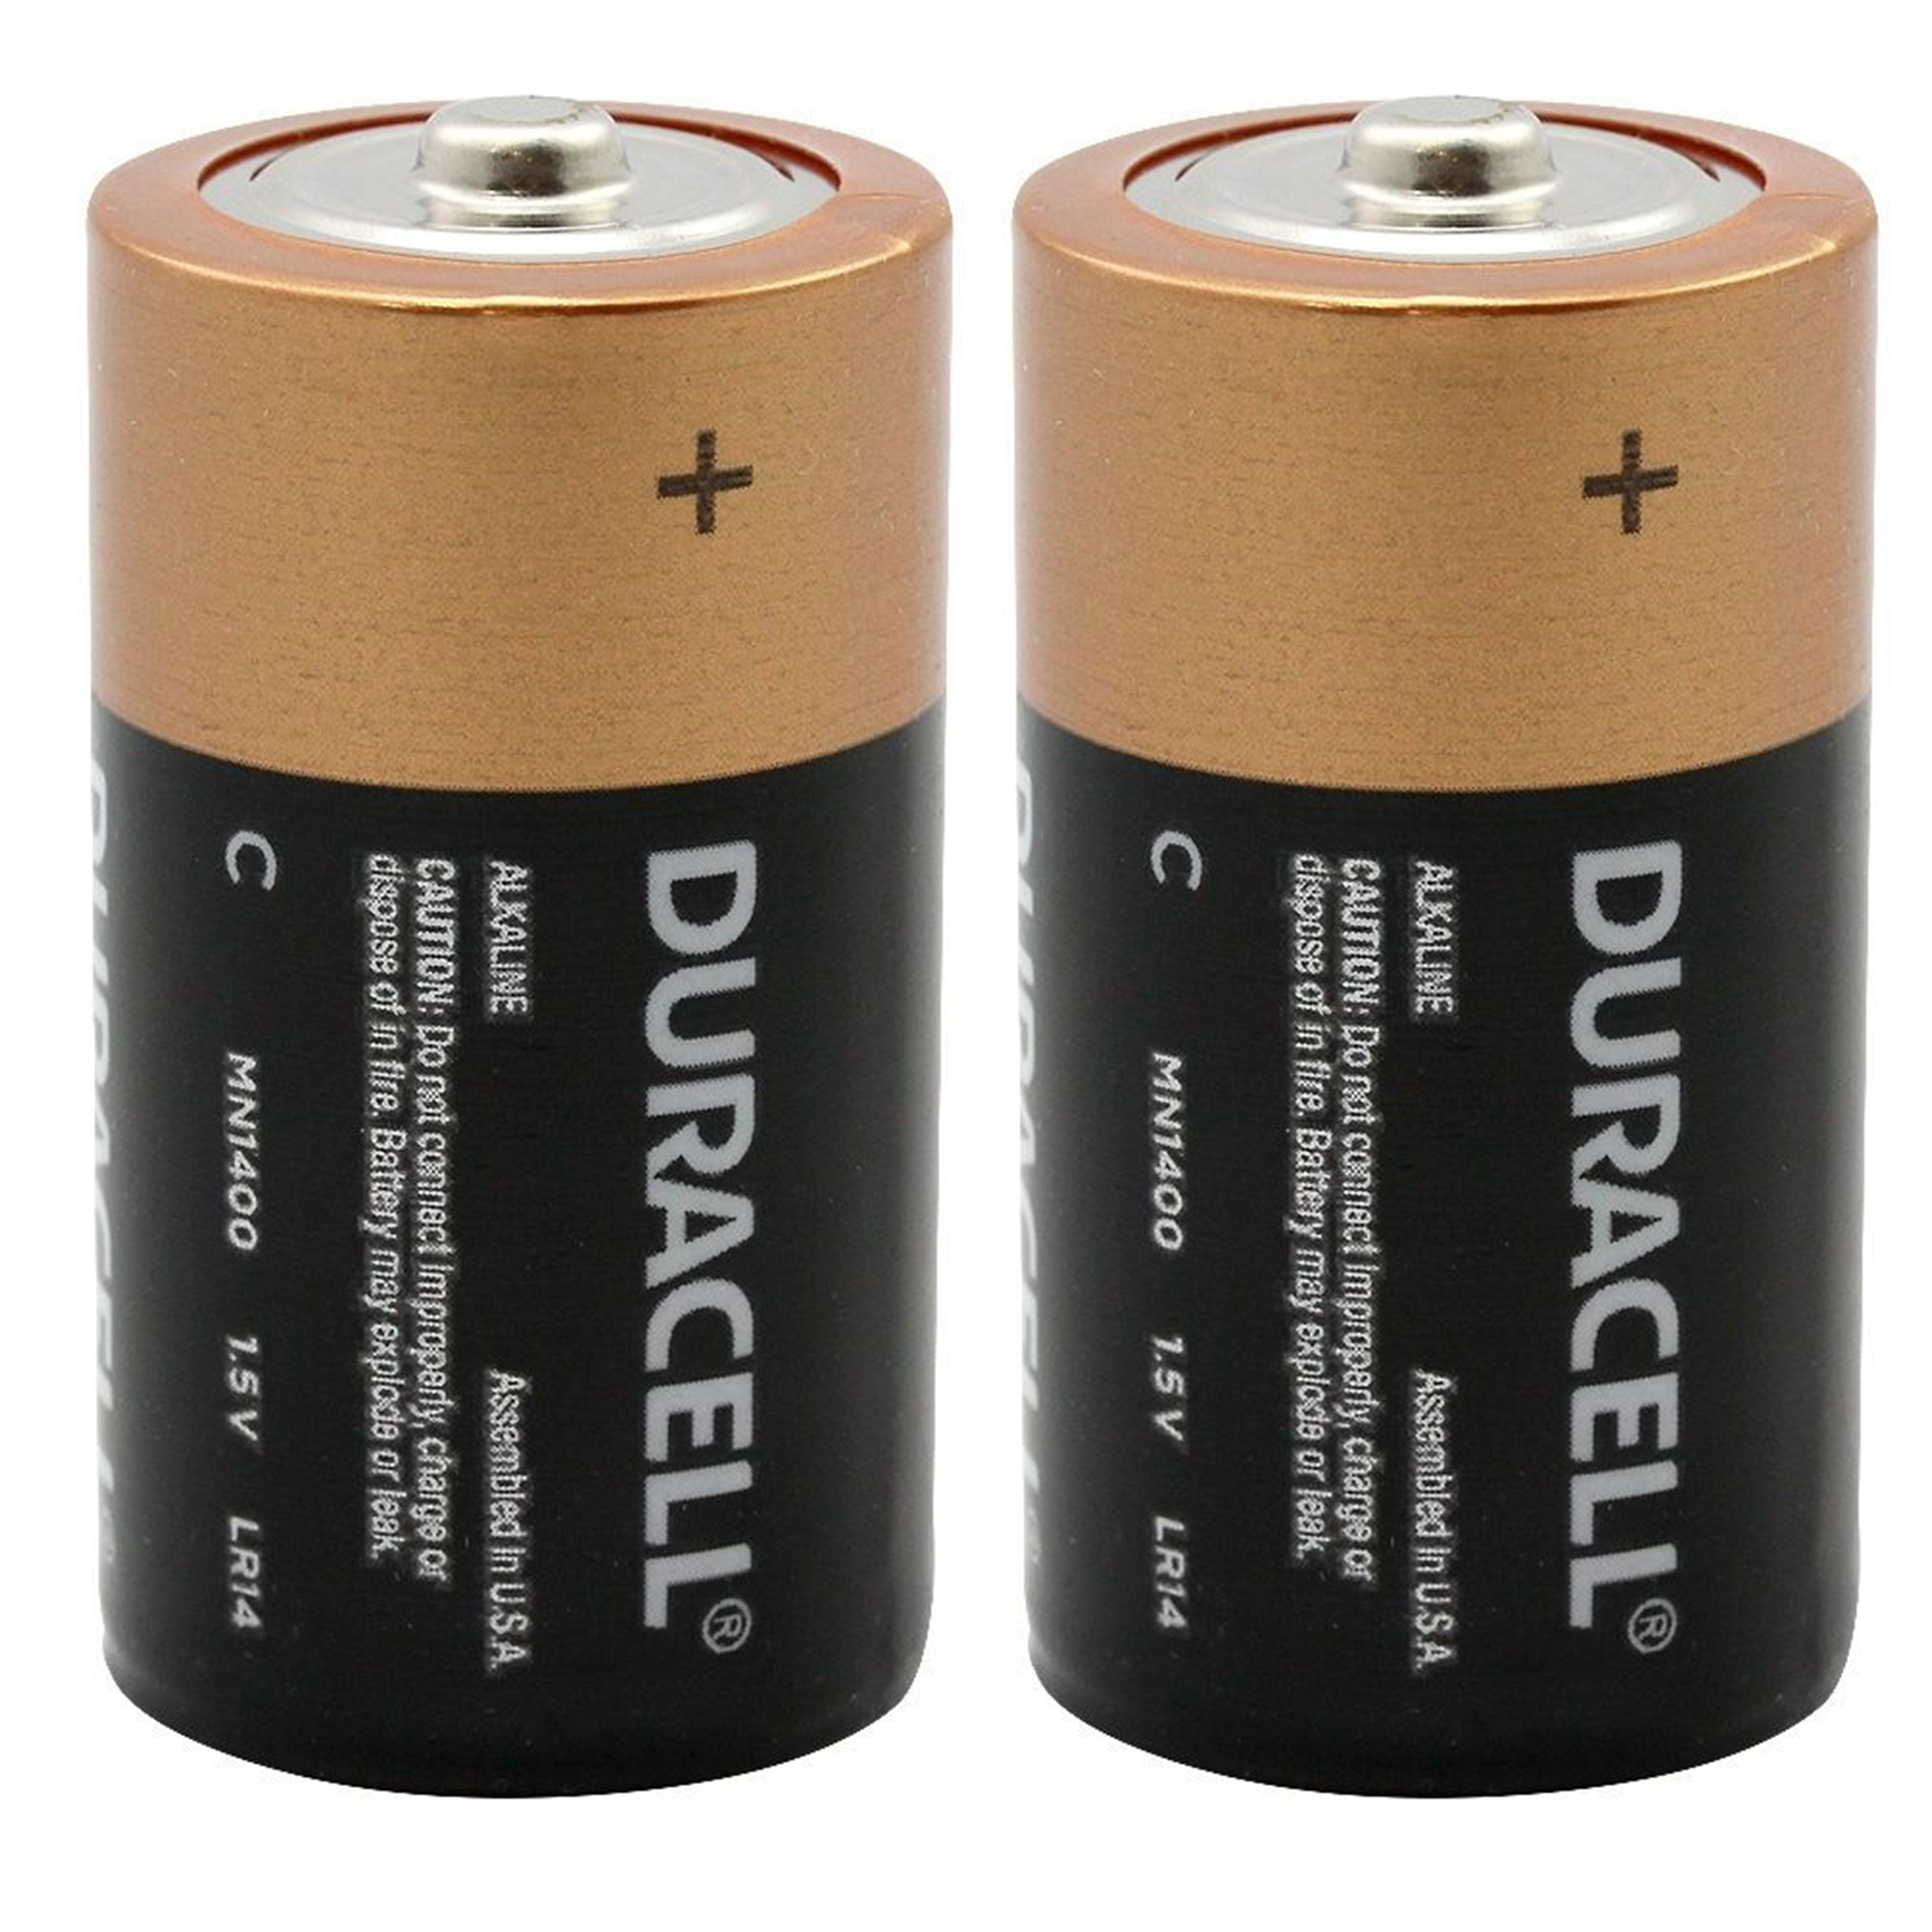 Duracell 10-Year Batteries, AA size